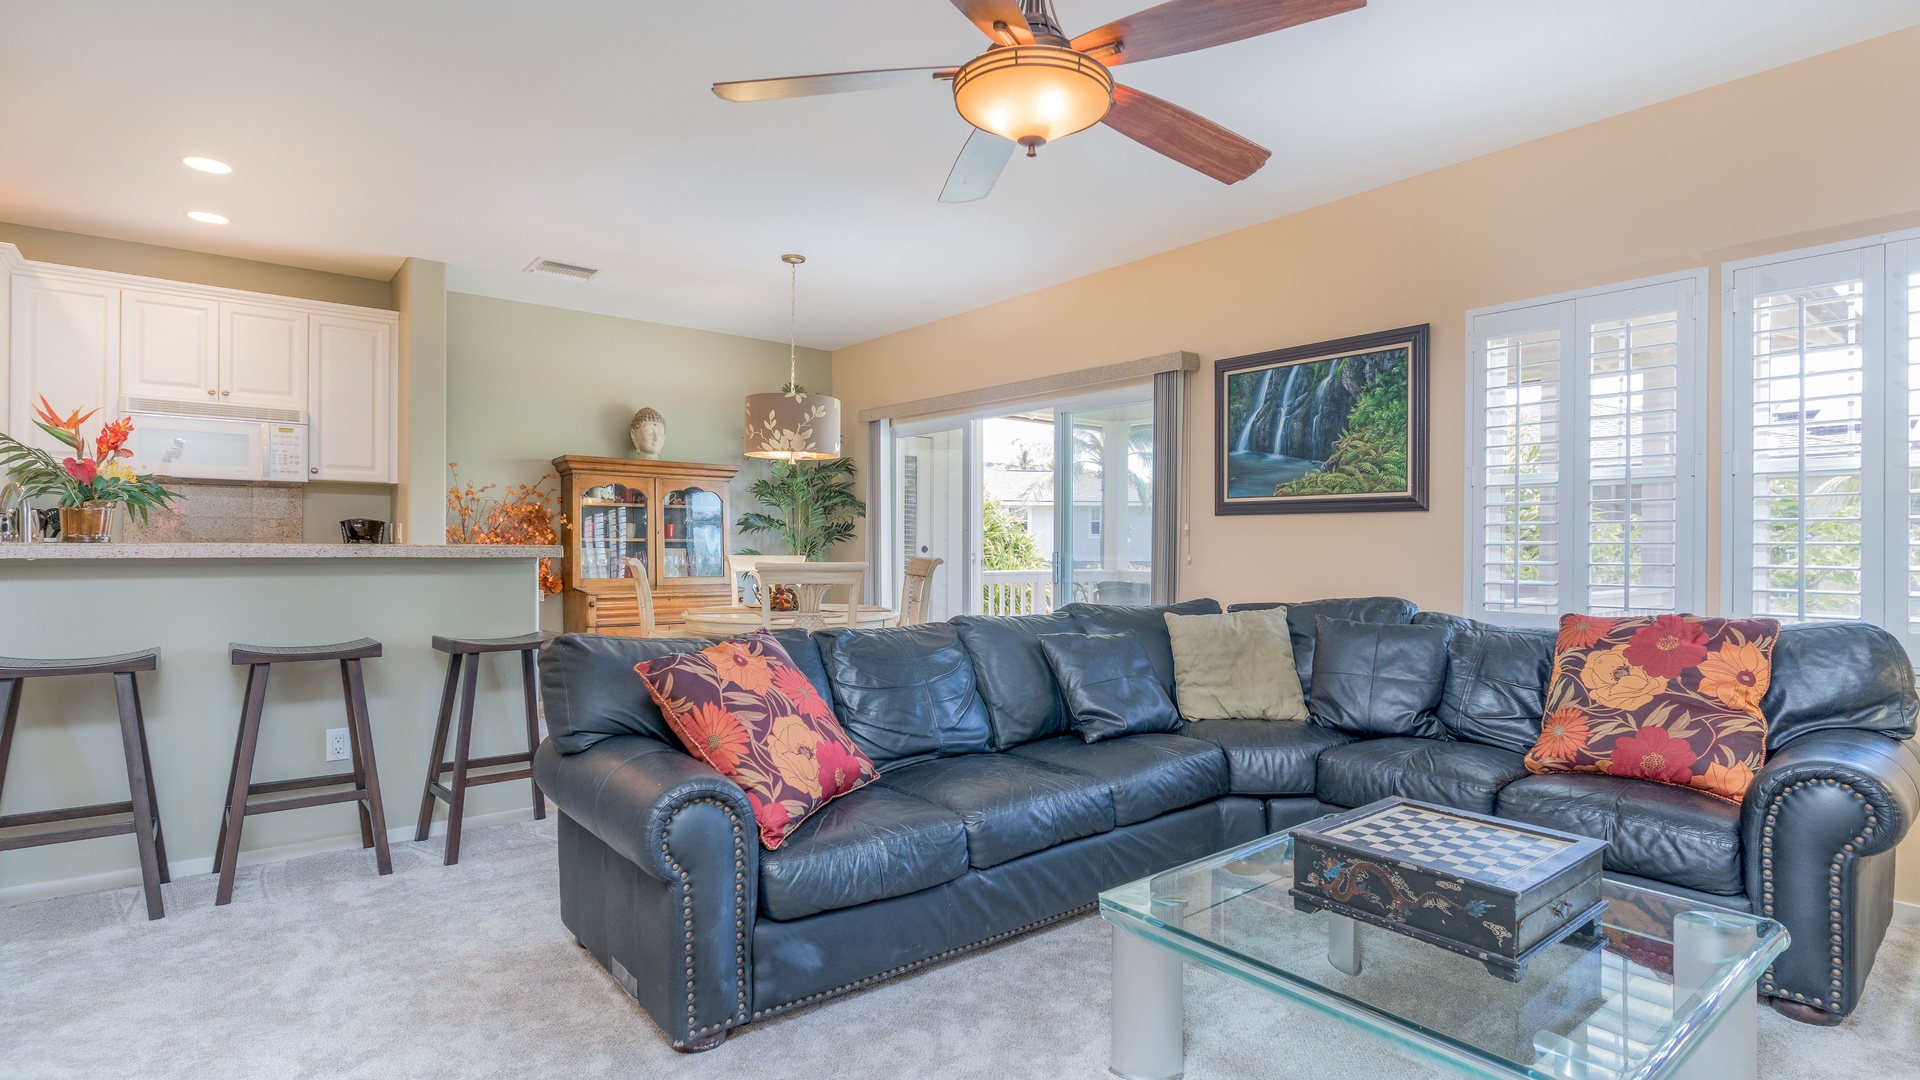 Kapolei Vacation Rentals, Coconut Plantation 1192-4 - The seamless floor plan creates a cozy kitchen, dining and living room vibe.